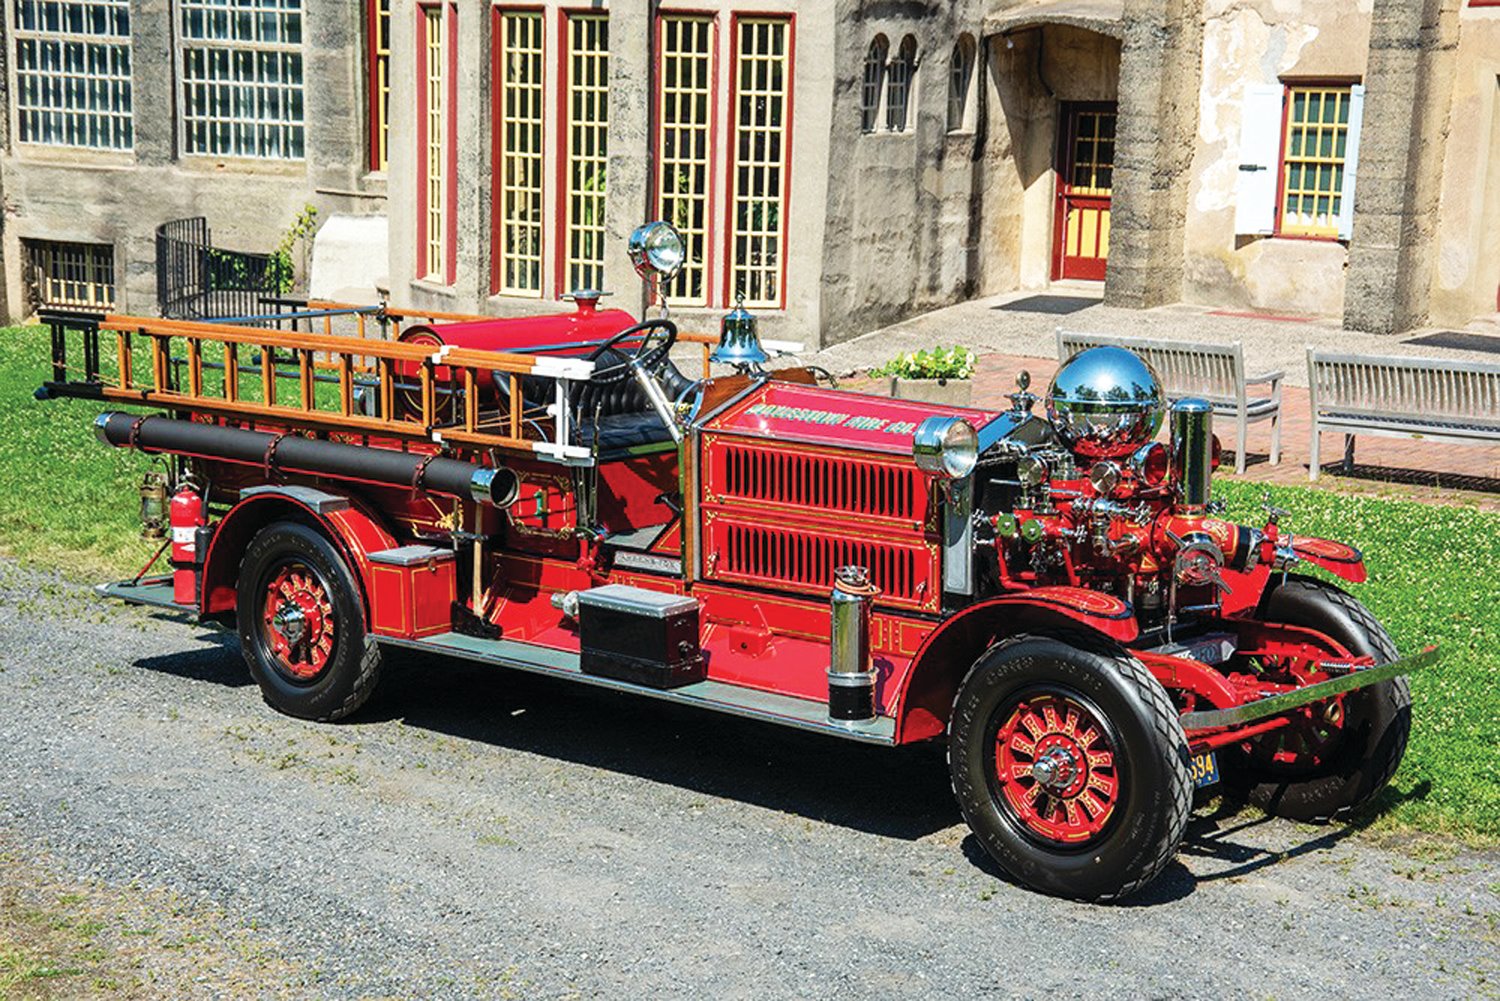 The Doylestown Fire Company’s classic fire truck, the Ahrens “Fox” Pumper, in 2023.